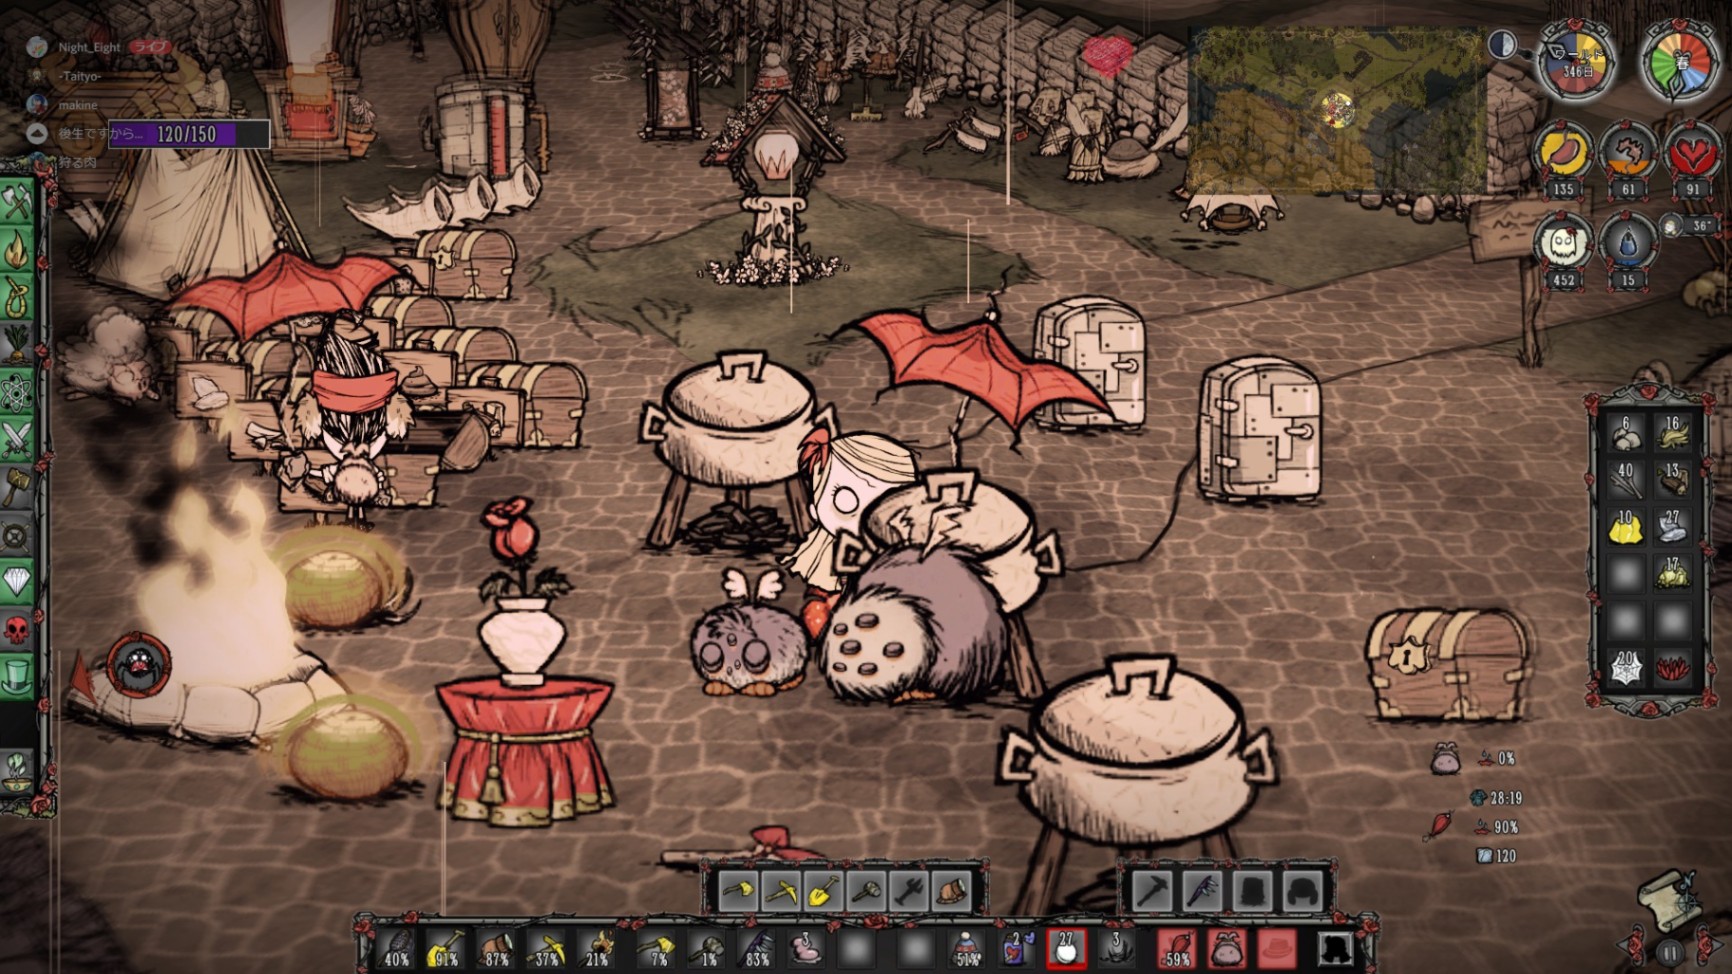 Take A Look At The Best Beginner's Tips For Don’t Starve Together